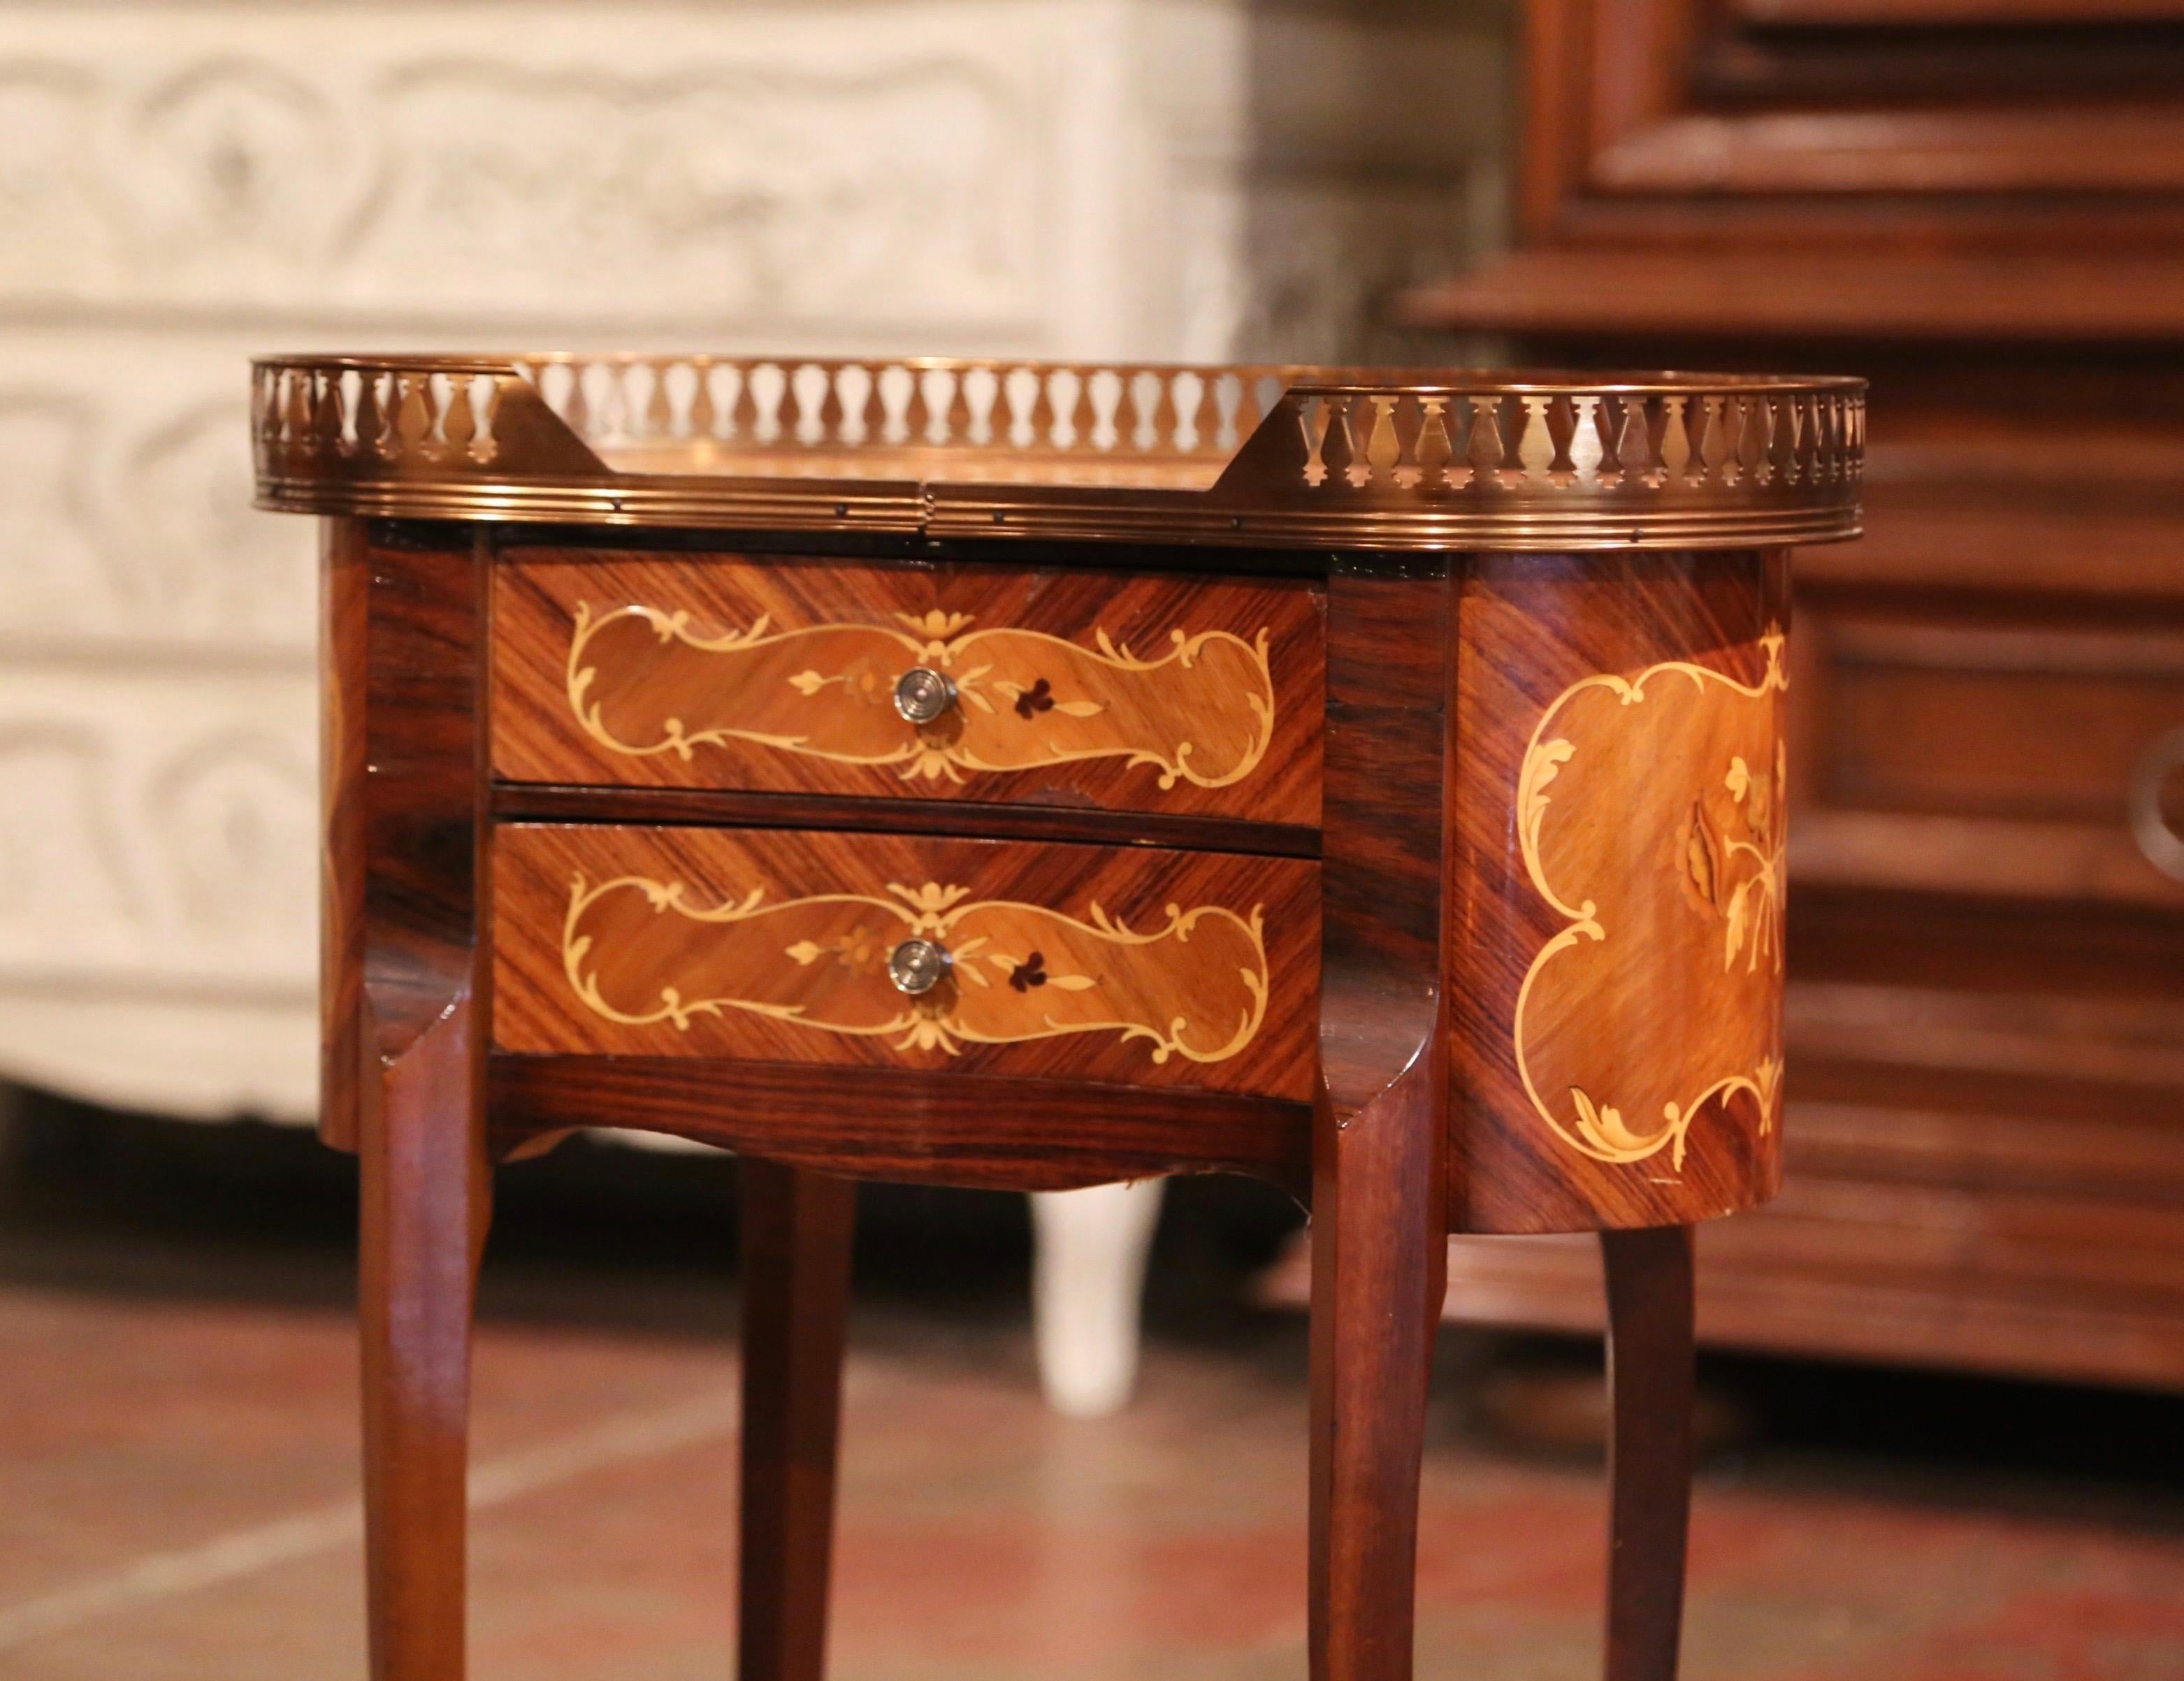 Inlay 20th Century French Louis XV Walnut Chest of Drawers with Inlaid Floral Decor